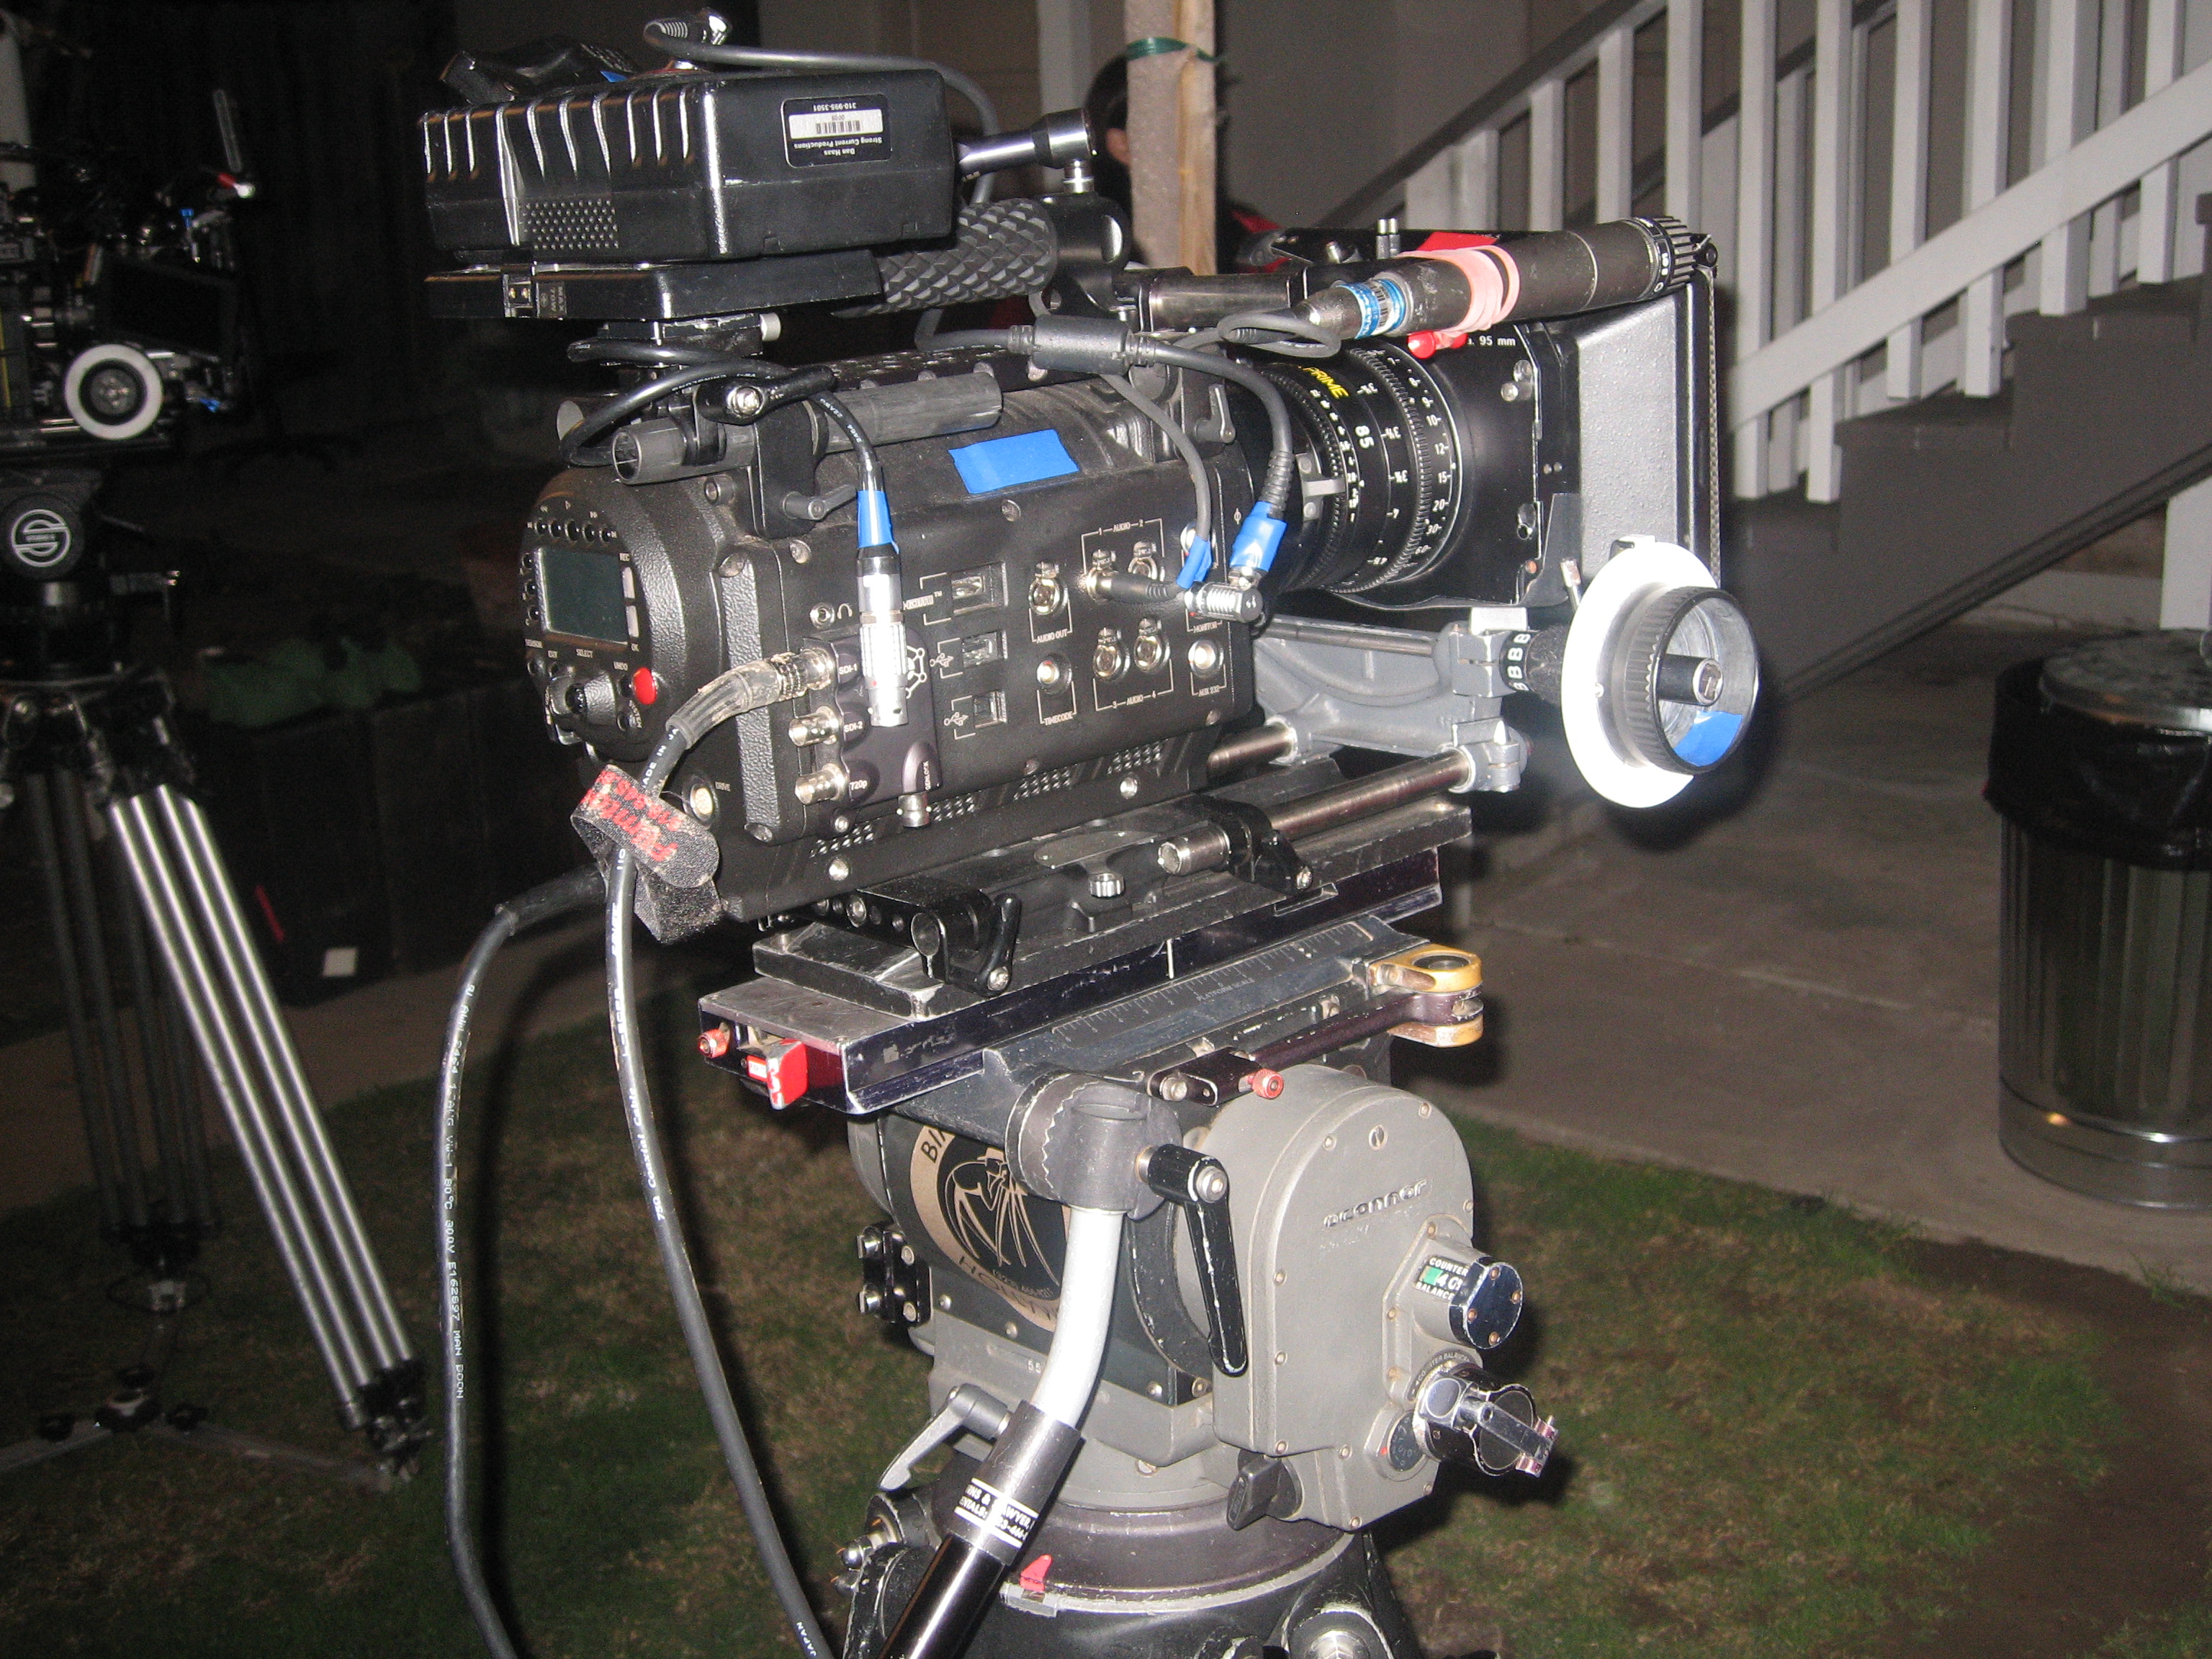 Just one of the many camera's that was used on the set of 